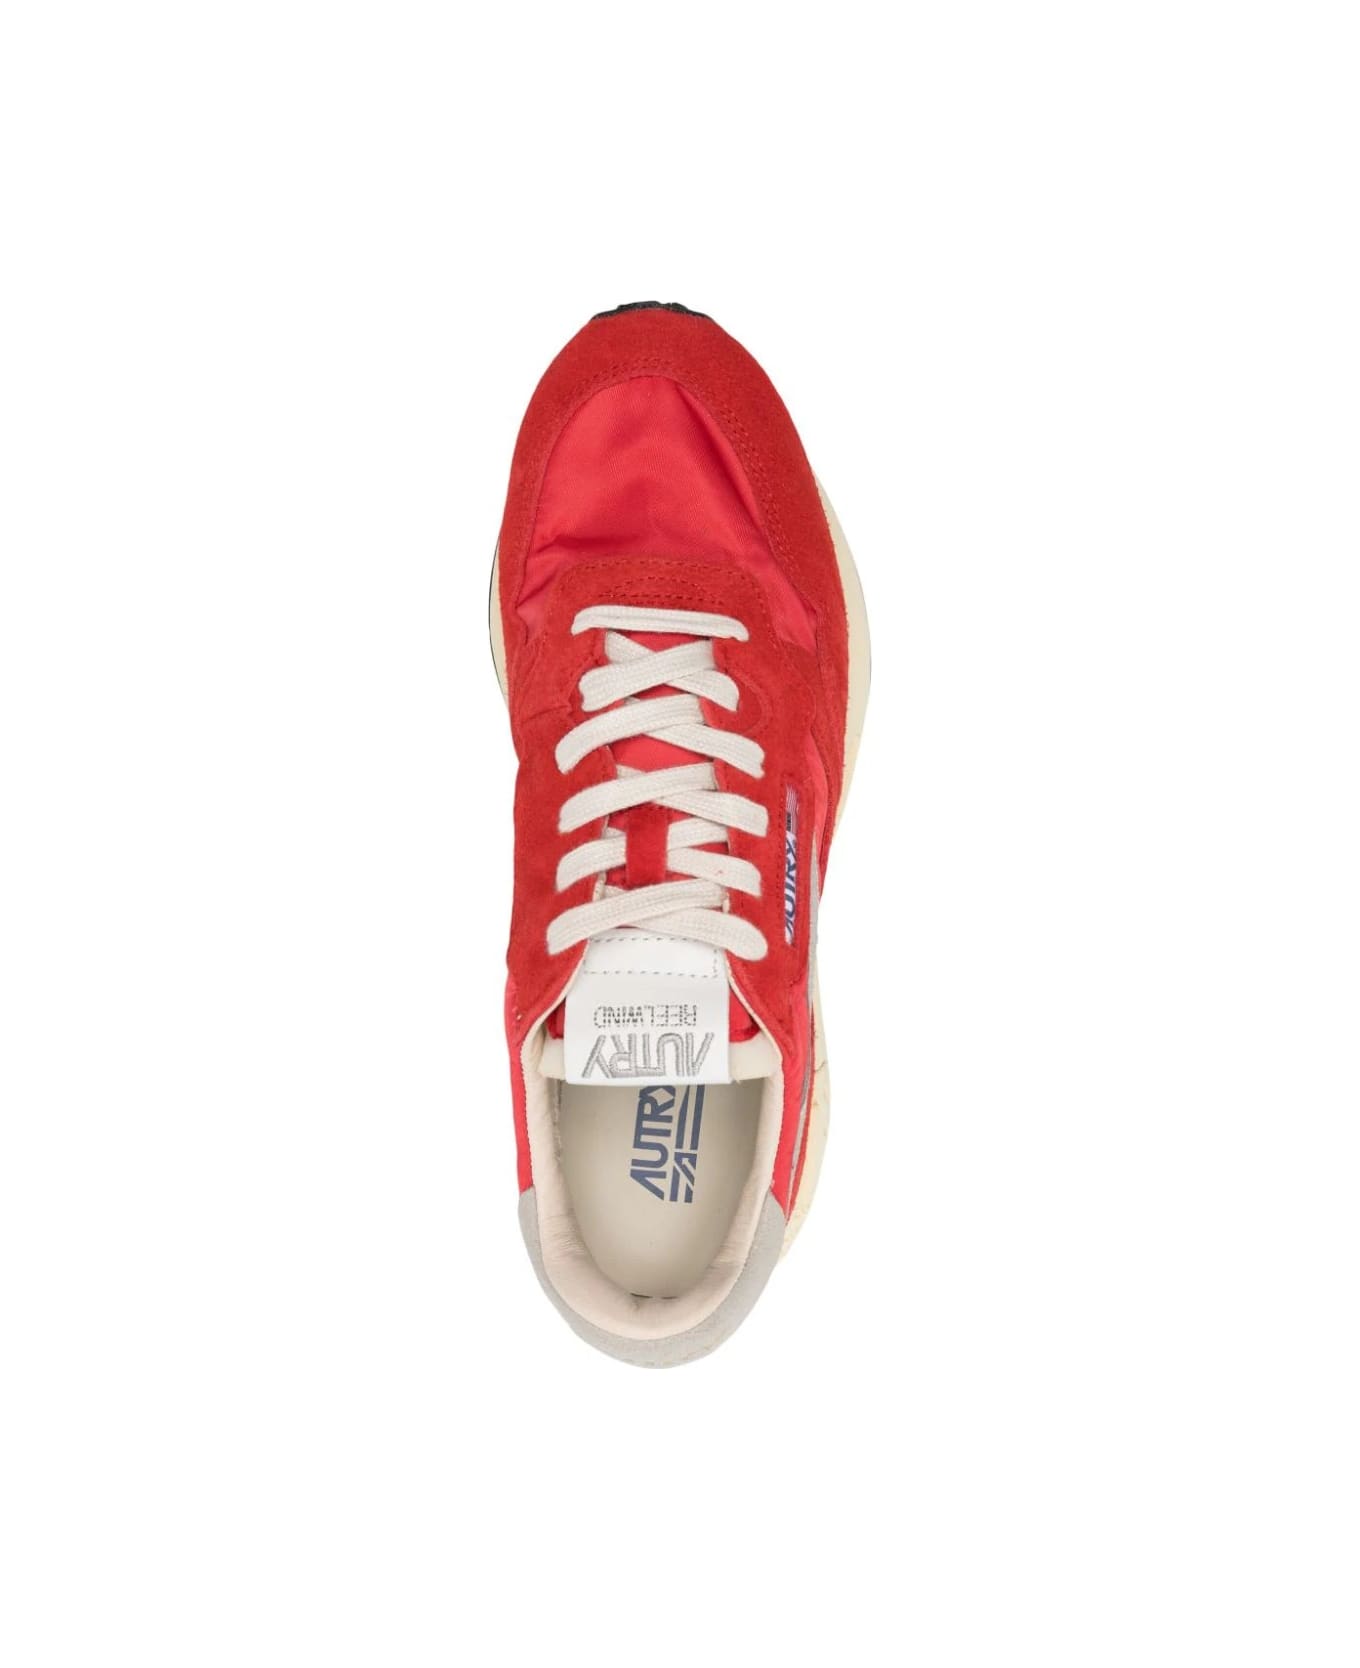 Autry Reelwind Low Nylon And Suede Sneakers - Red スニーカー